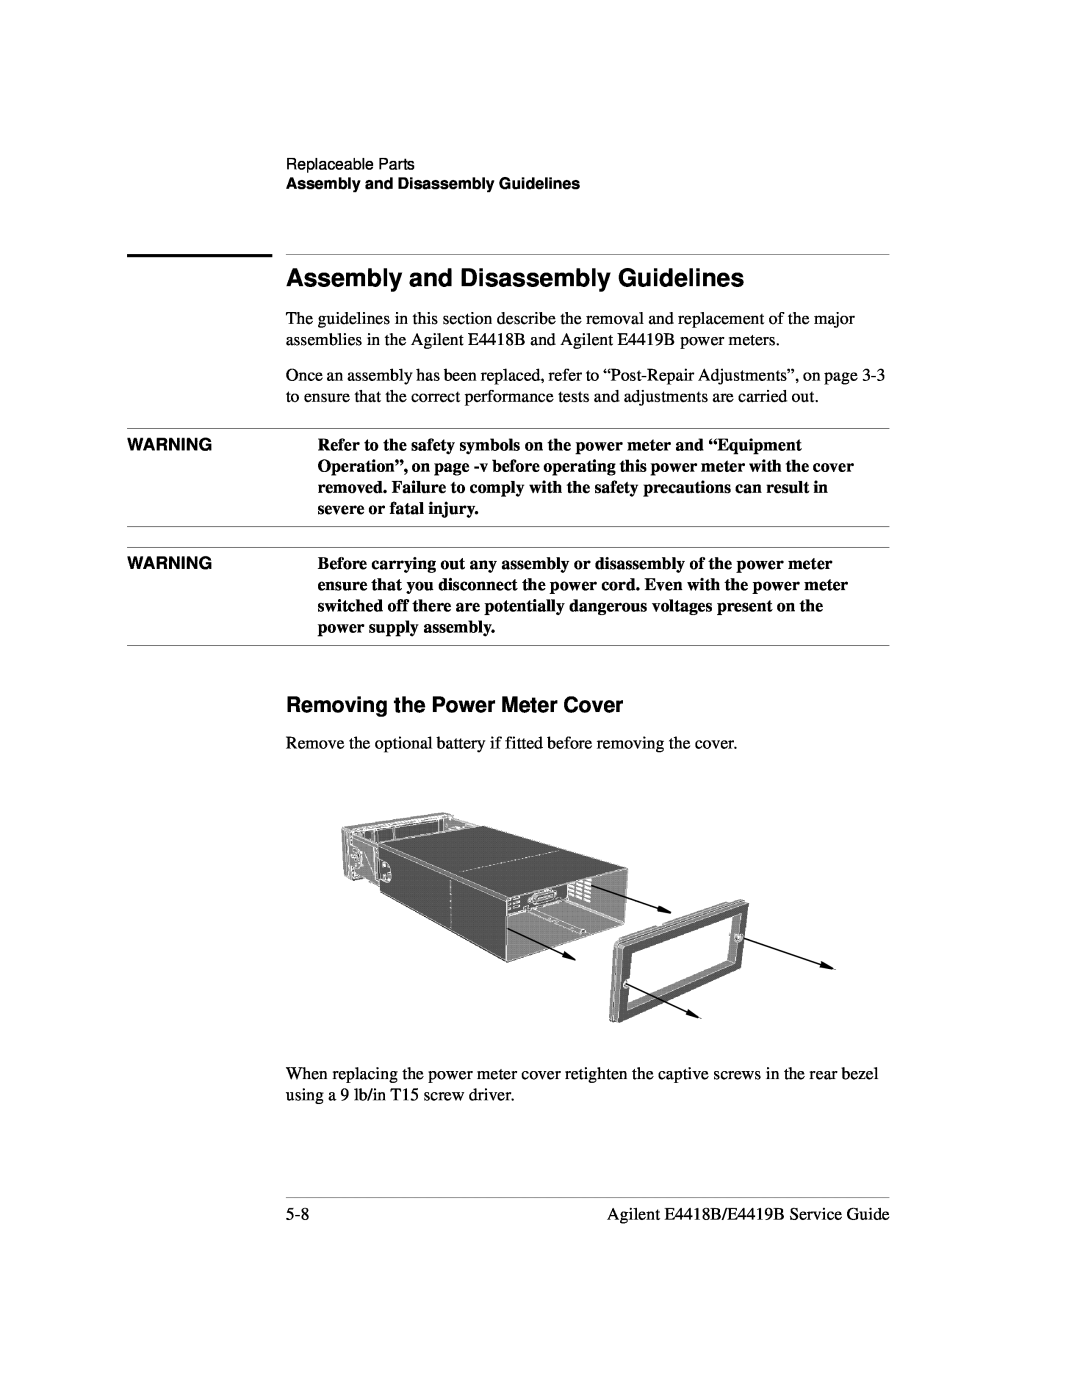 Agilent Technologies e4418b, e4419b manual Assembly and Disassembly Guidelines, Removing the Power Meter Cover 